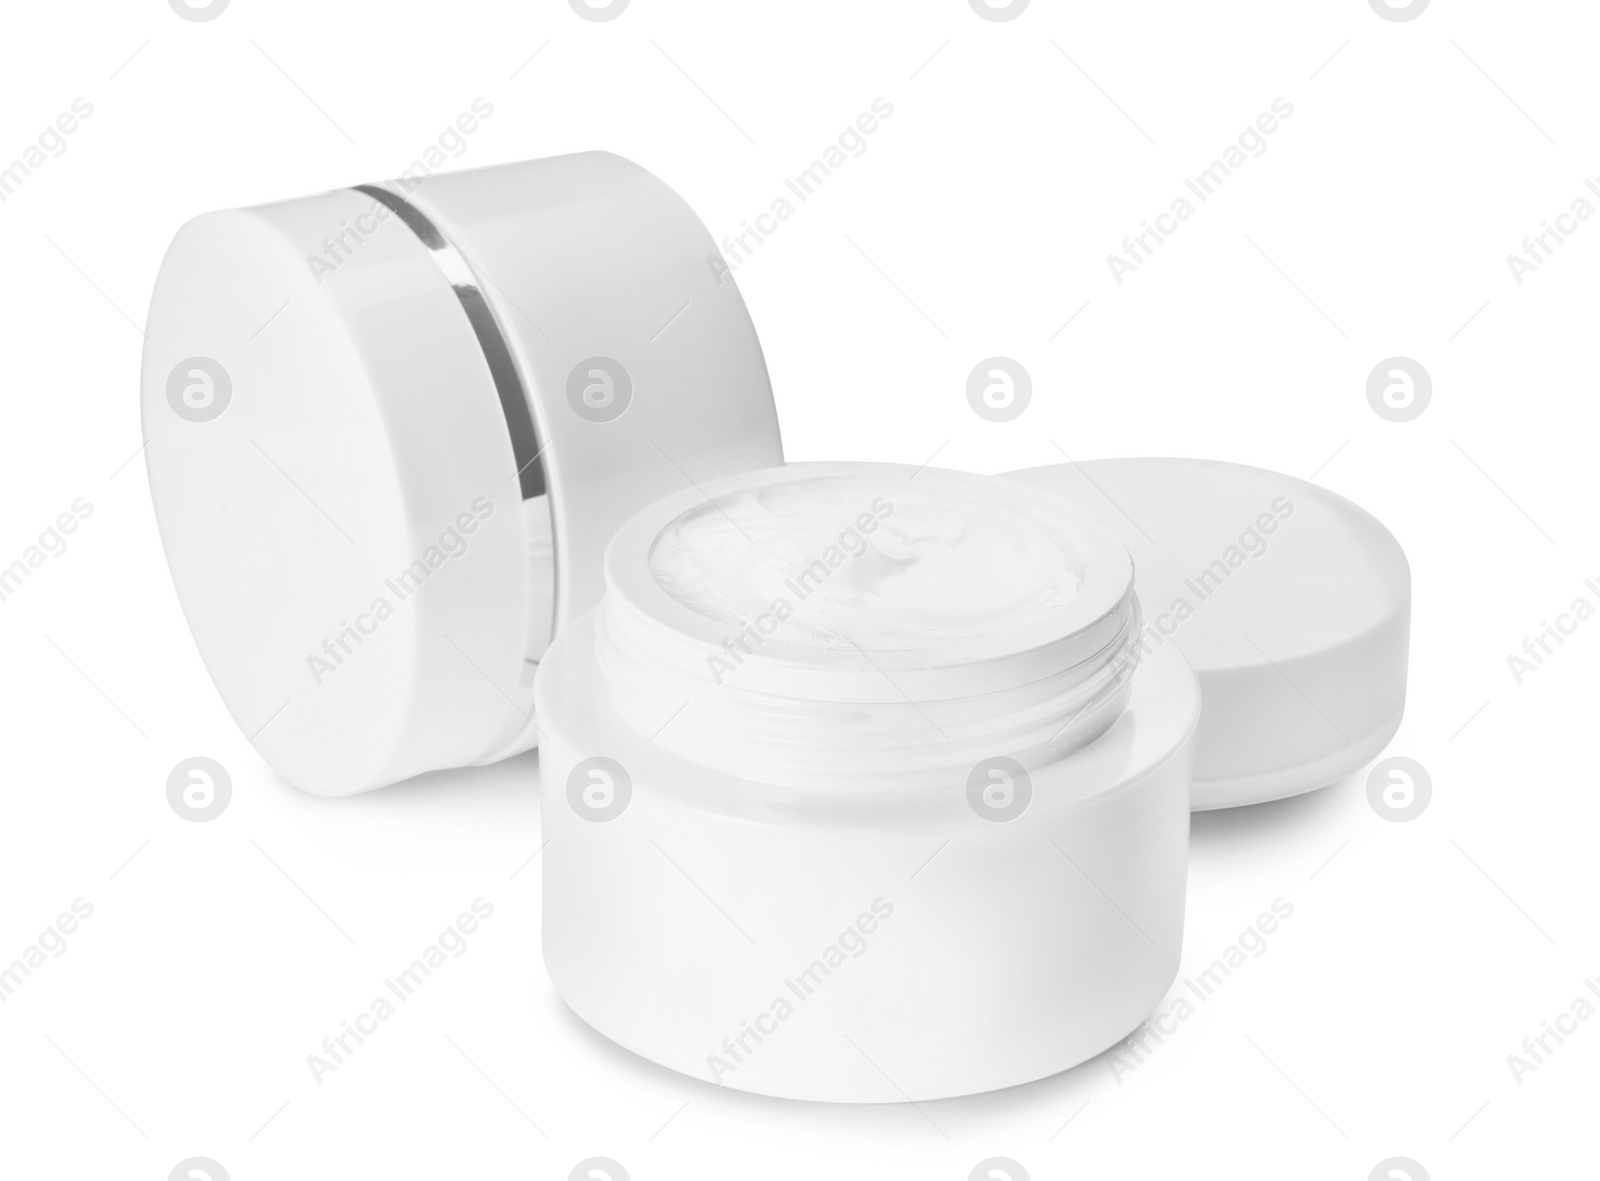 Photo of Jars of luxury face creams isolated on white